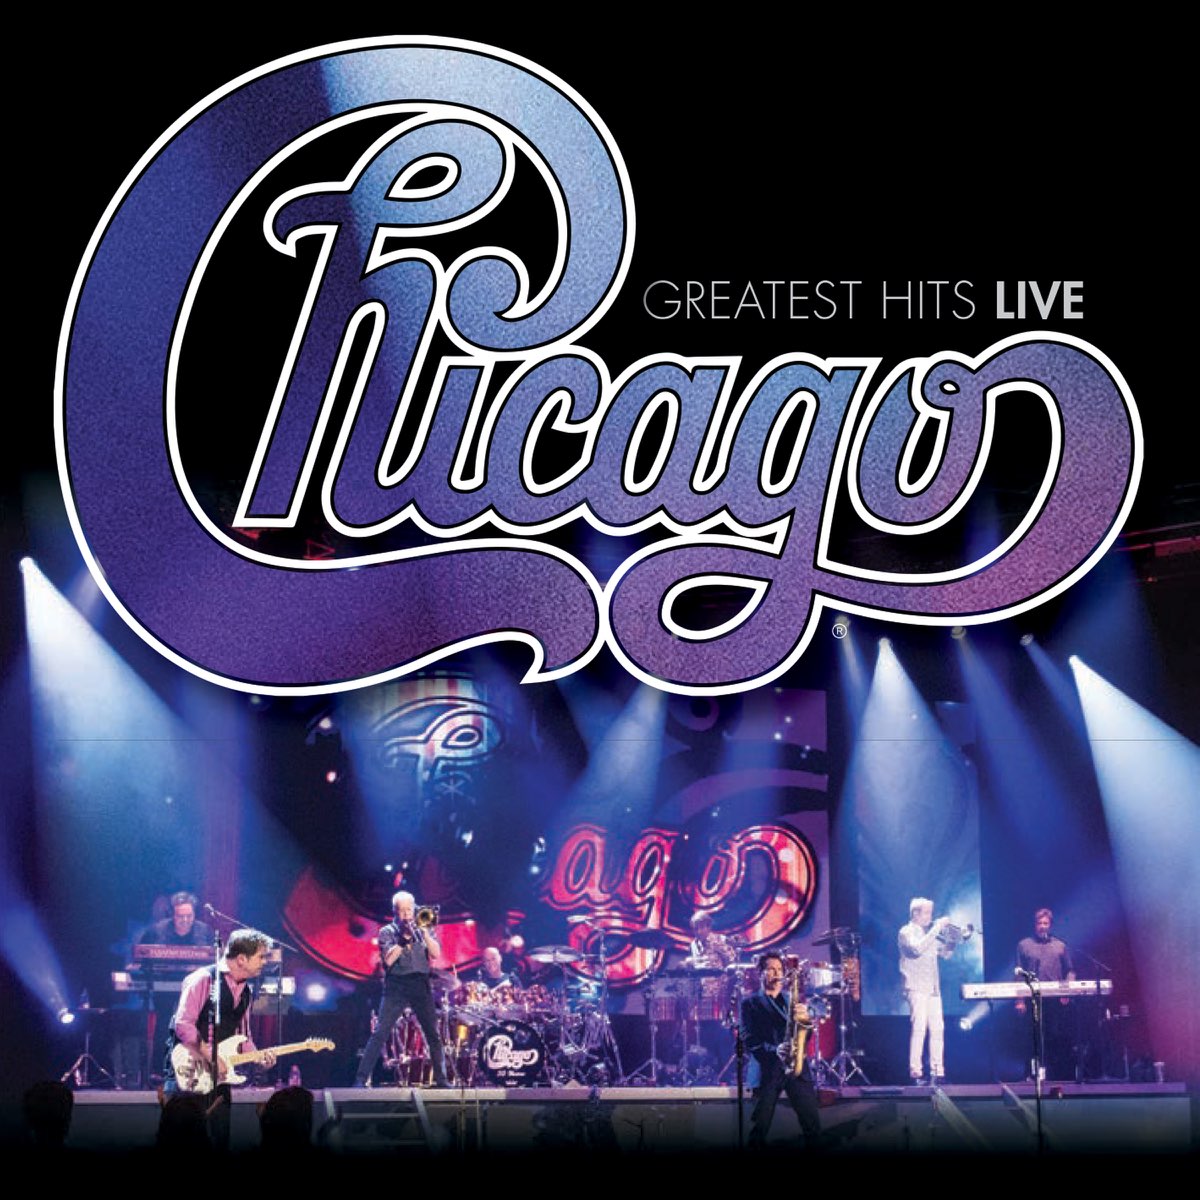 Greatest Hits Live by Chicago on Apple Music